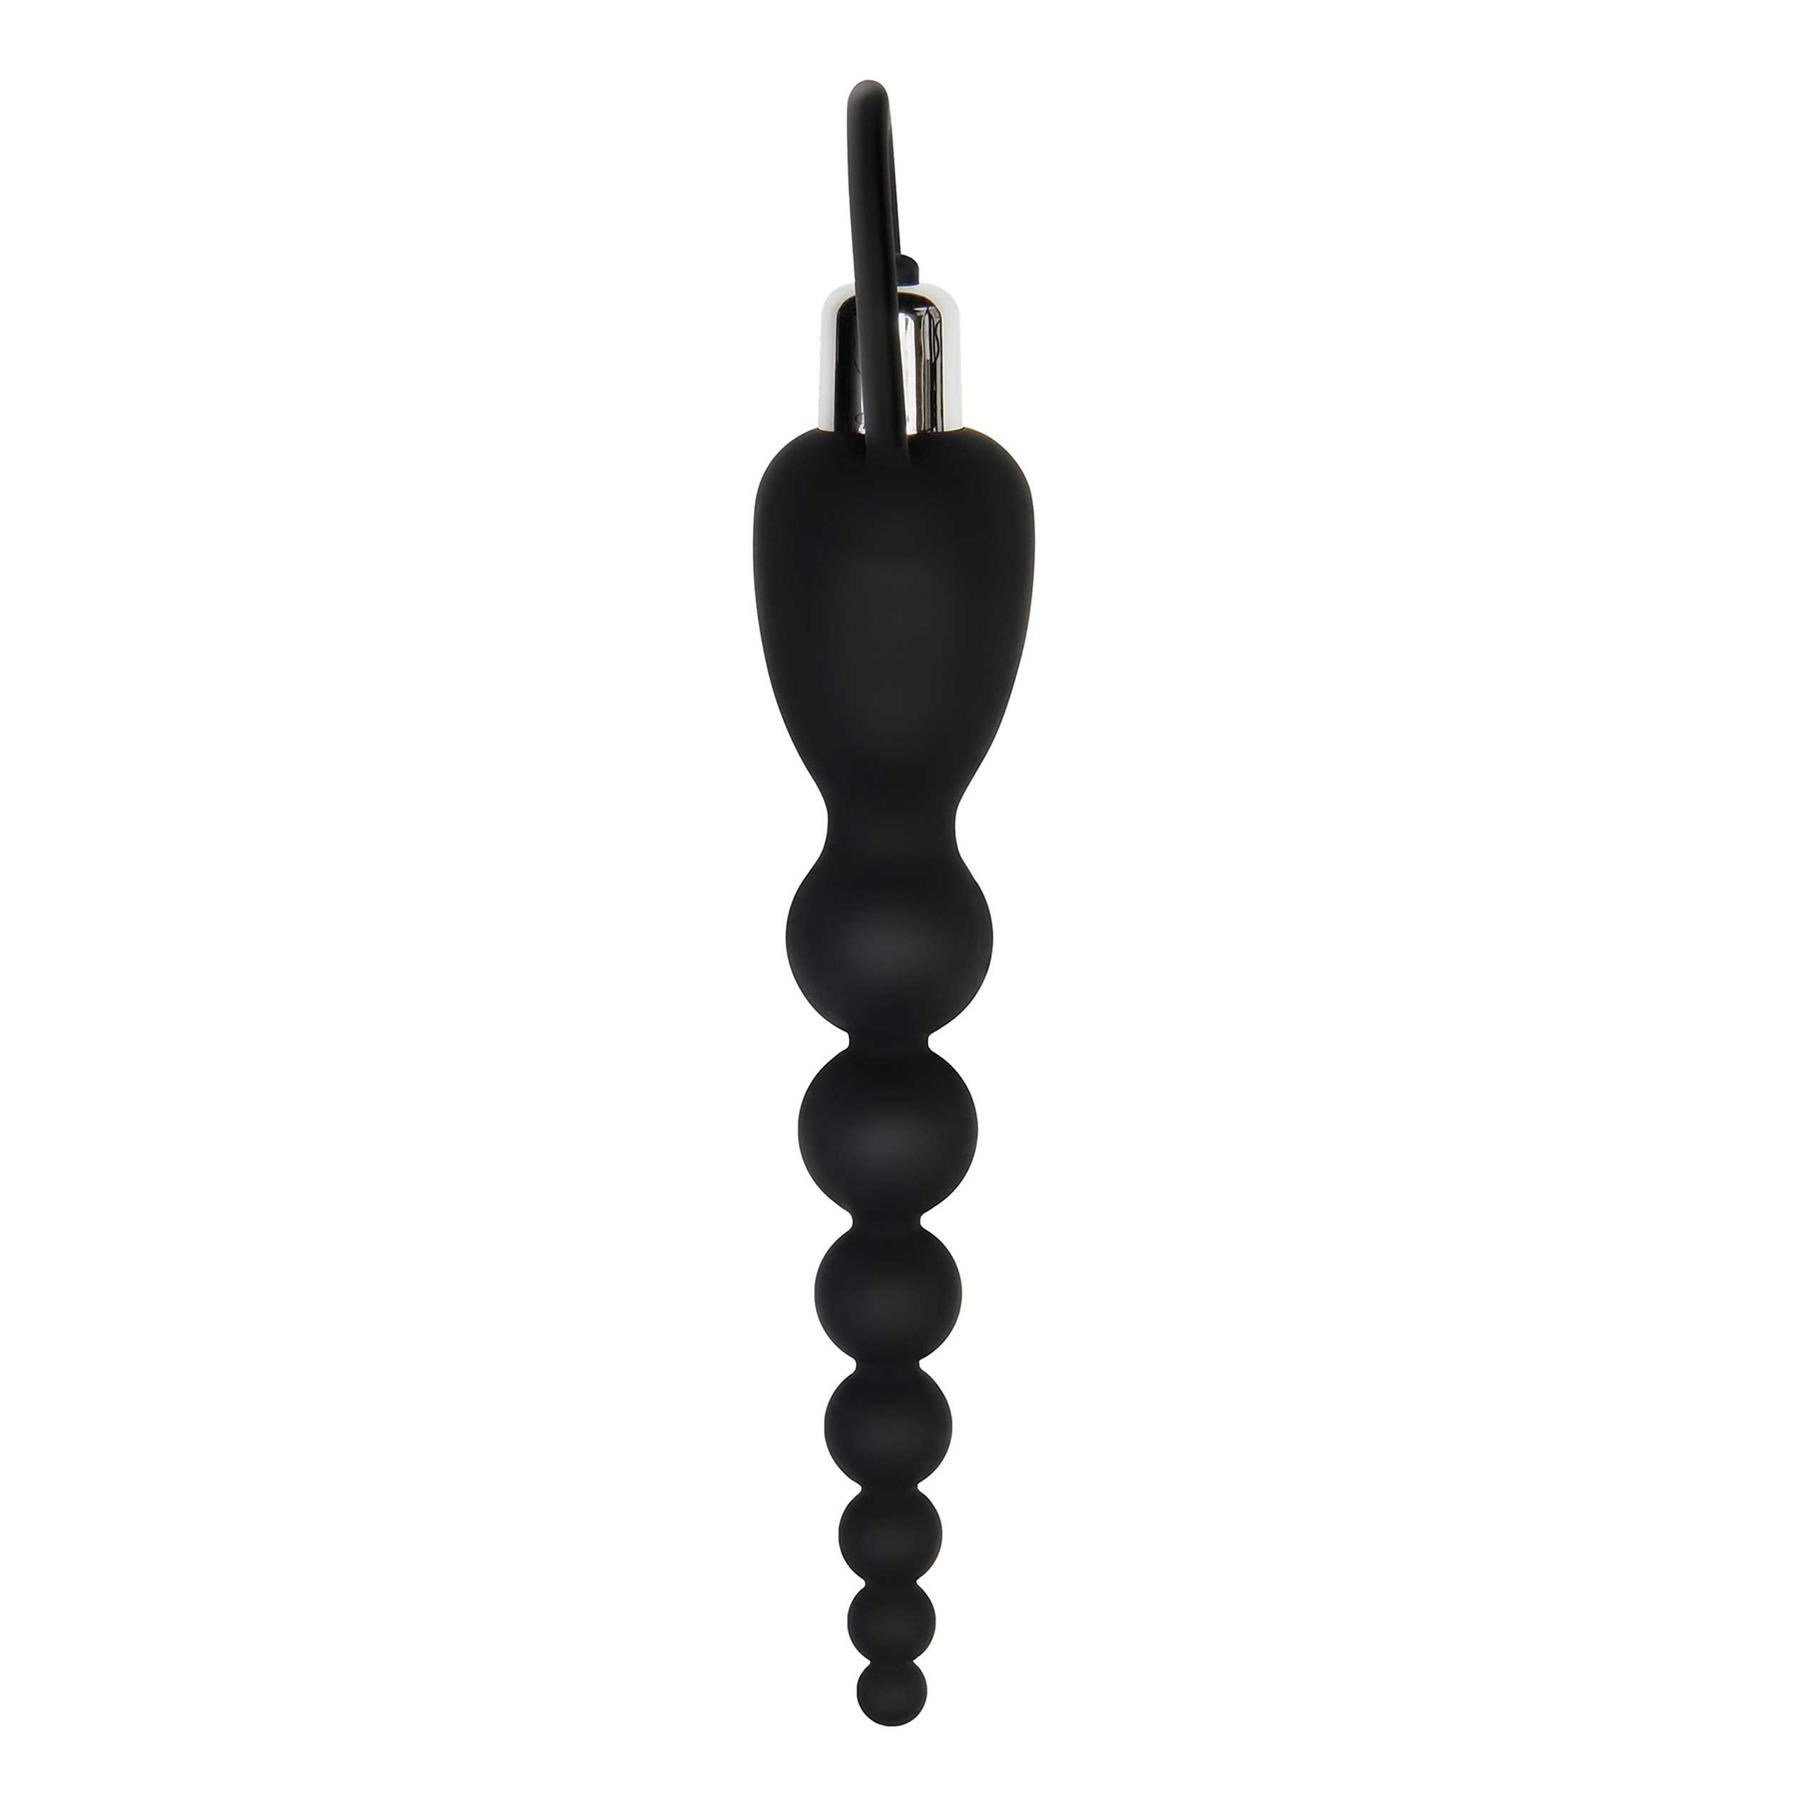 Adam & Eve Vibrating Silicone Anal Beads